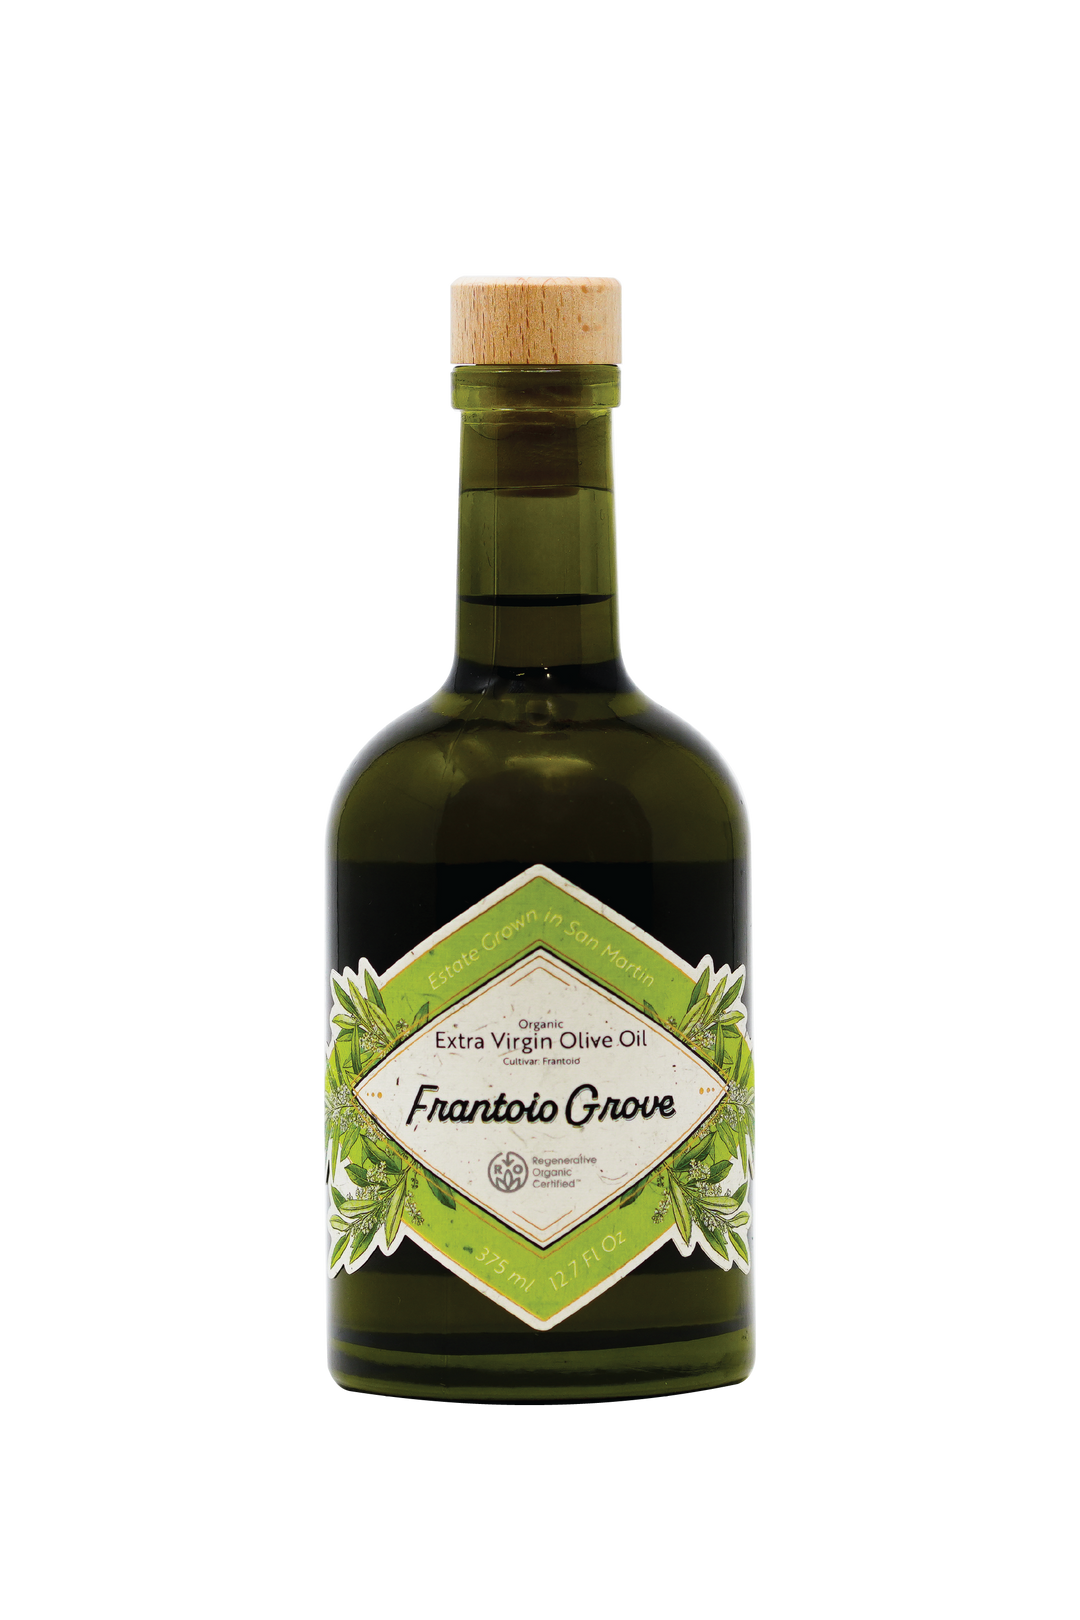 An Image OF Frantoio Grove's Flagship Frantoio Extra Virgin Olive Oil In a 375 ml Bottle With A White Background. Green and white diamond-shaped label with olive blossoms and leaves. Additional text on label reads: Estate grown in San Martin. Organic Extra Virgin Olive Oil. Cultivar: Frantoio. Regenerative Organic Certified.